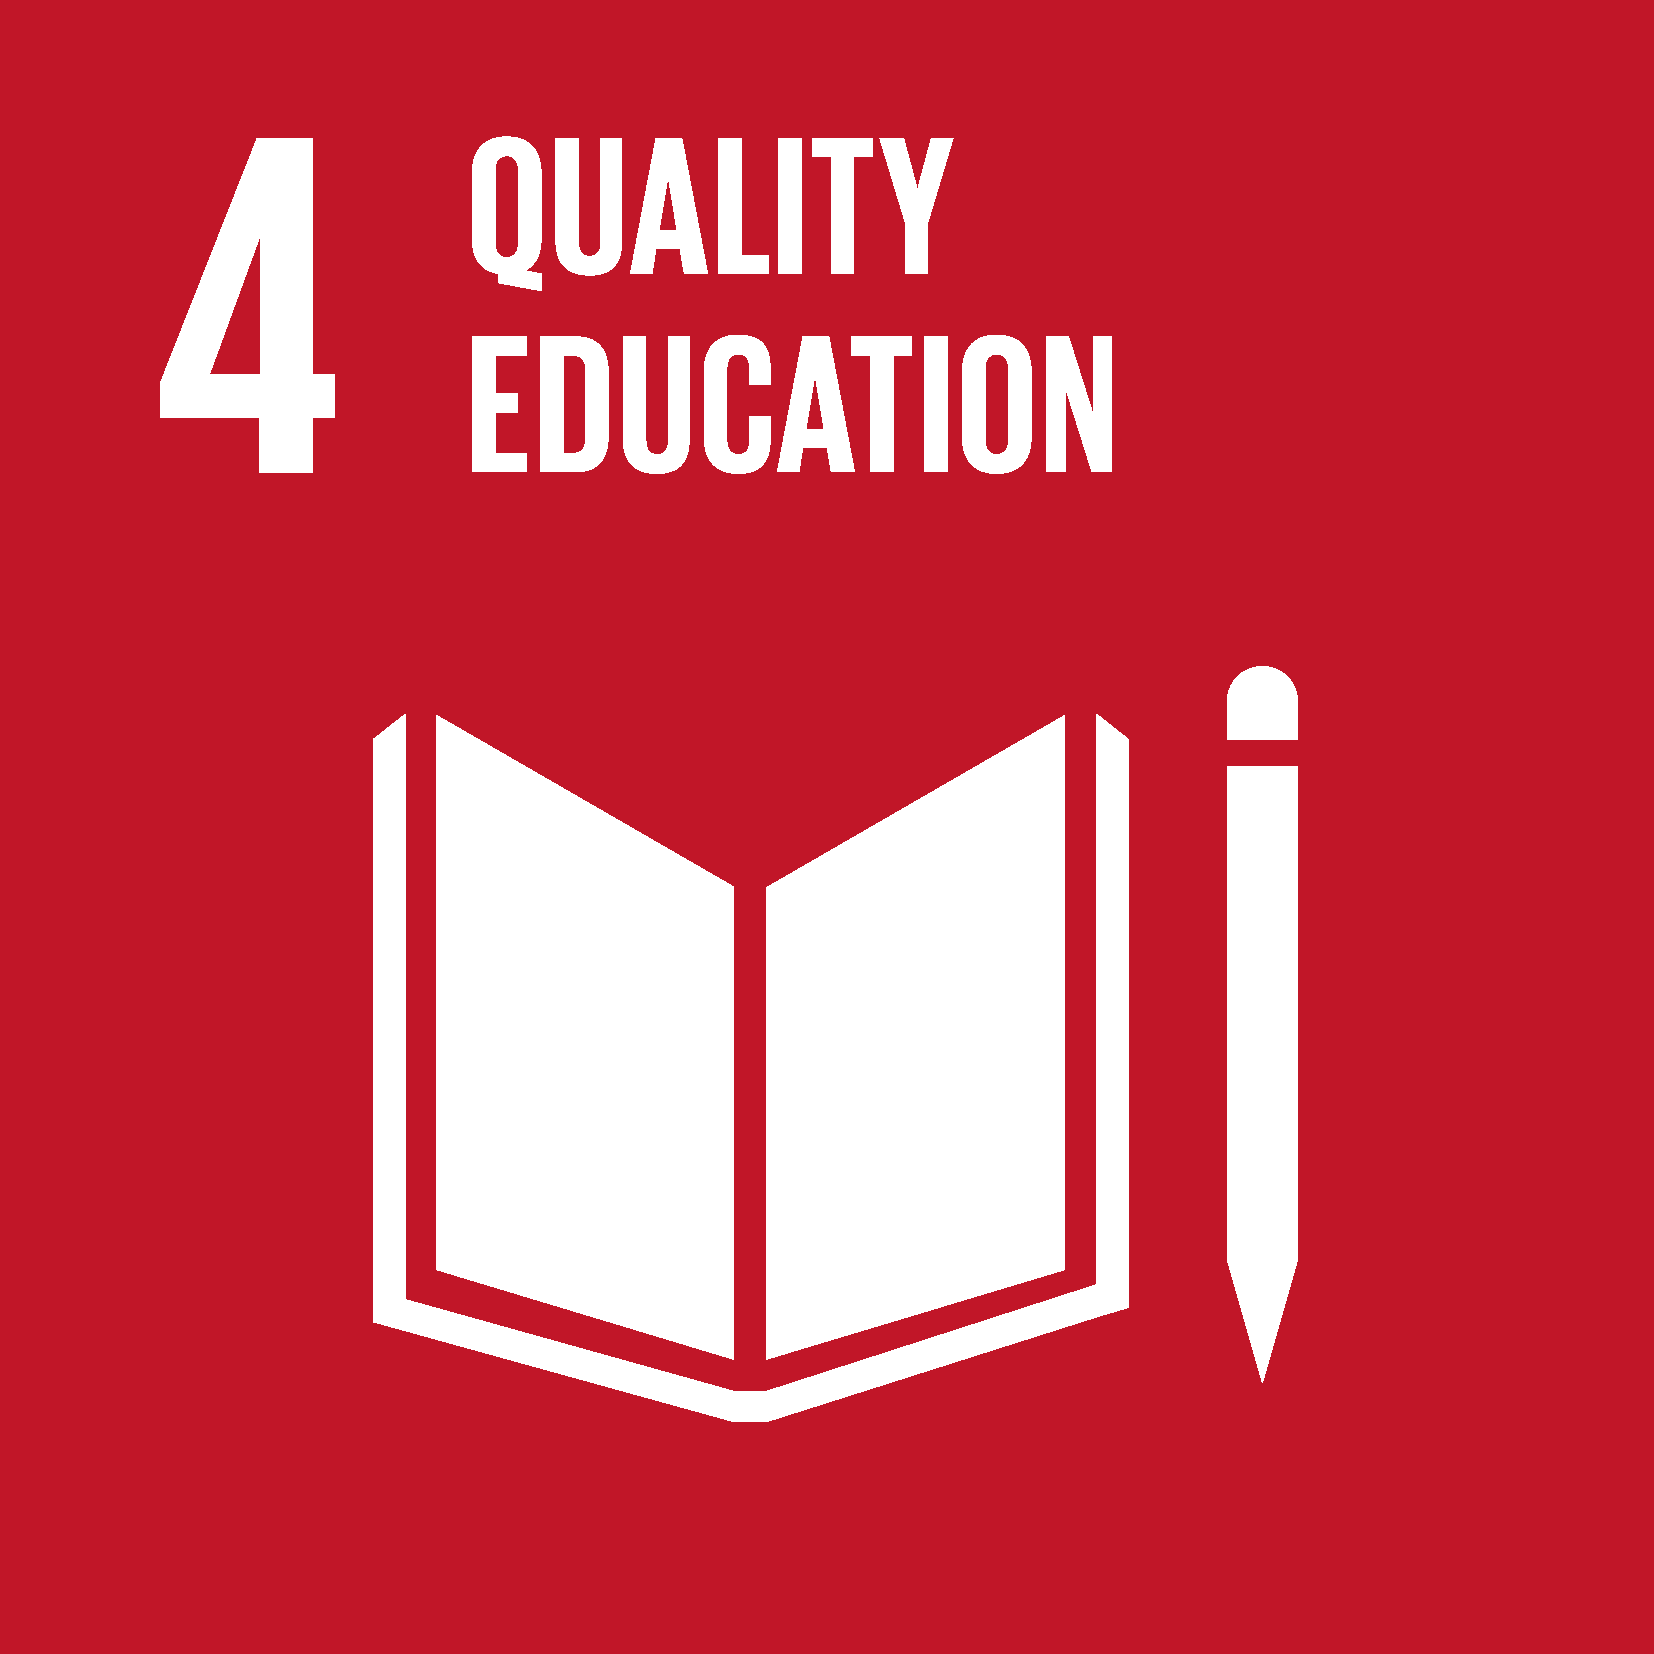 The Global Goal 4 Quality education